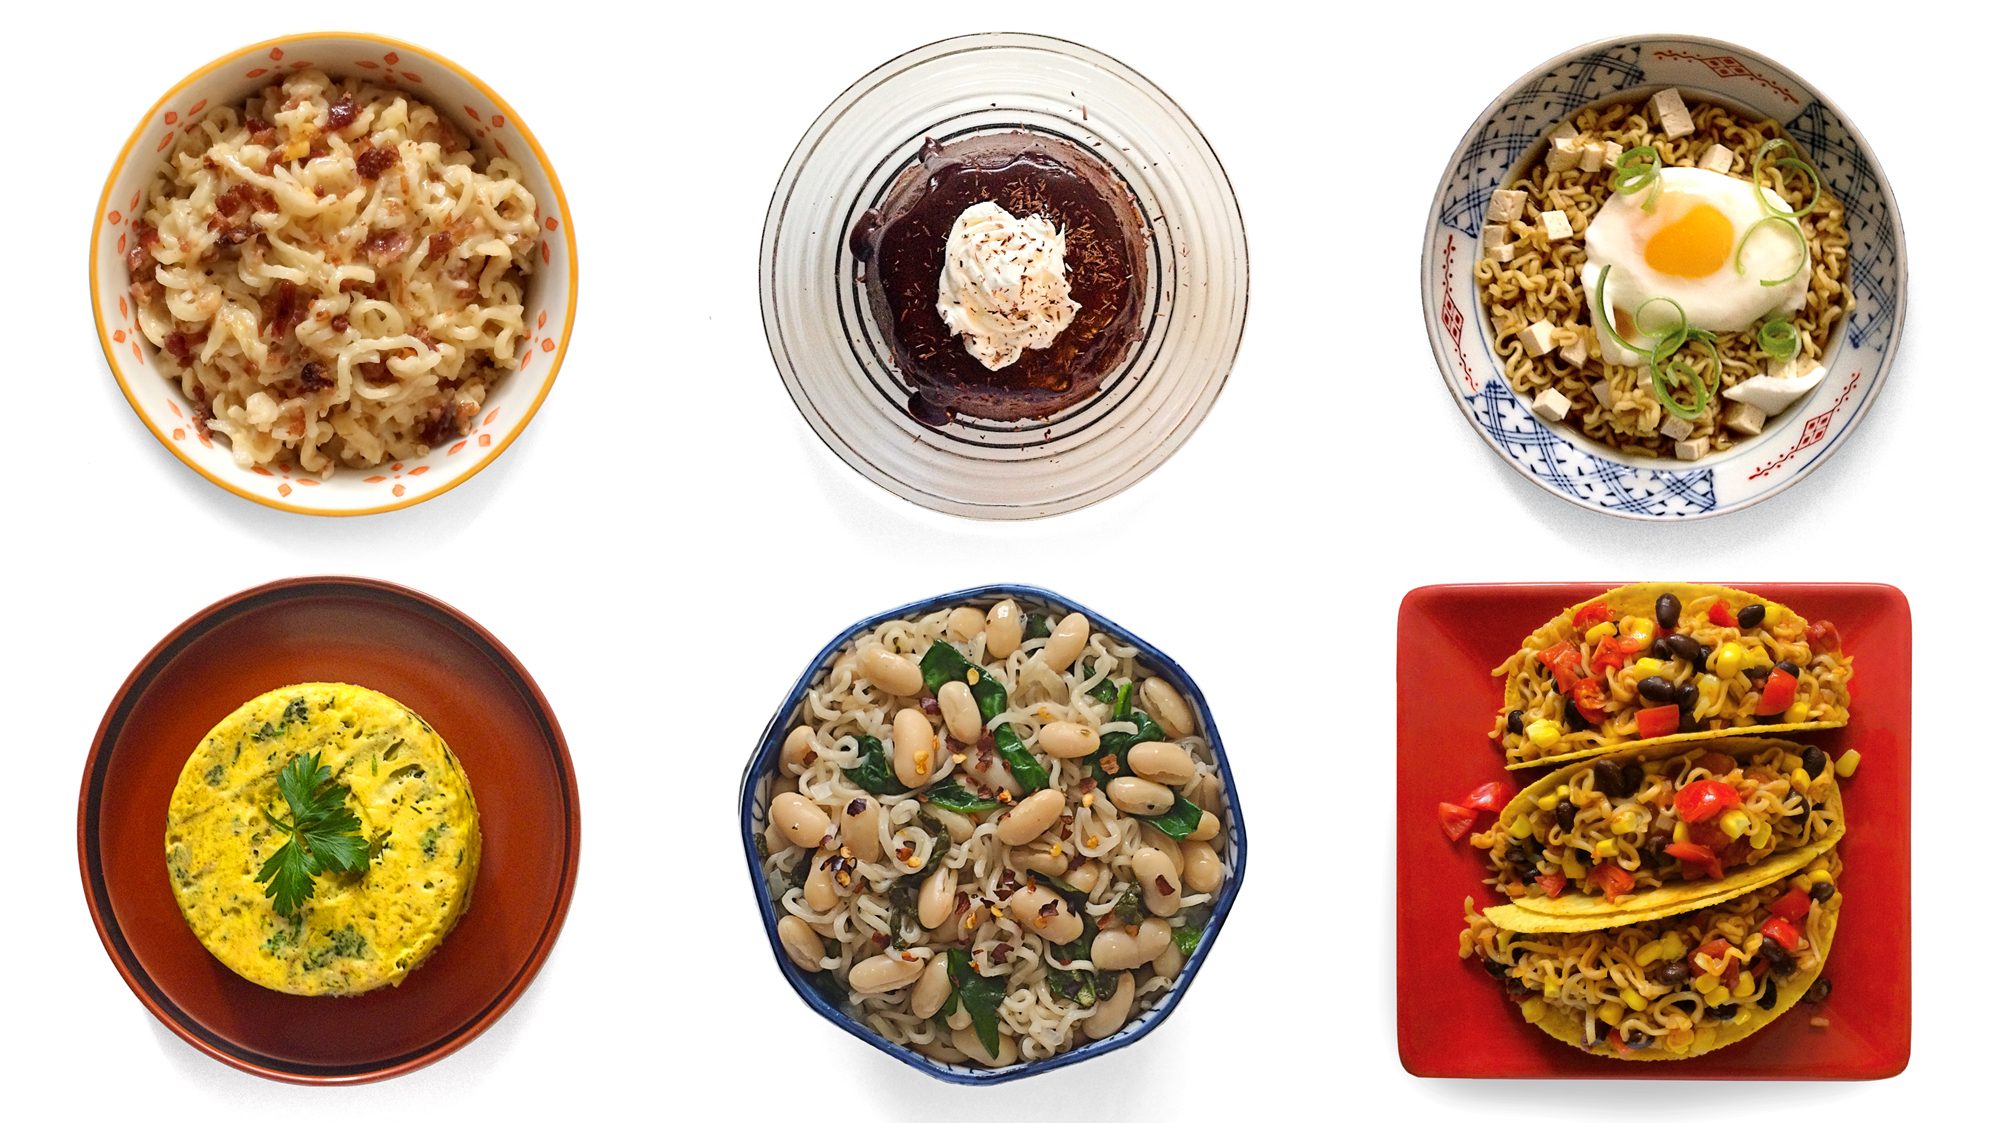 (Top left, clockwise) Macmen N' Cheese; chocolate ramen; udon and egg. (Bottom row) Ramen fritatta; cannellini beans and spinach; and southwest taco from the book Rah! Rah! Ramen. Photo: Sara Childs/ Courtesy of Interactive Direct